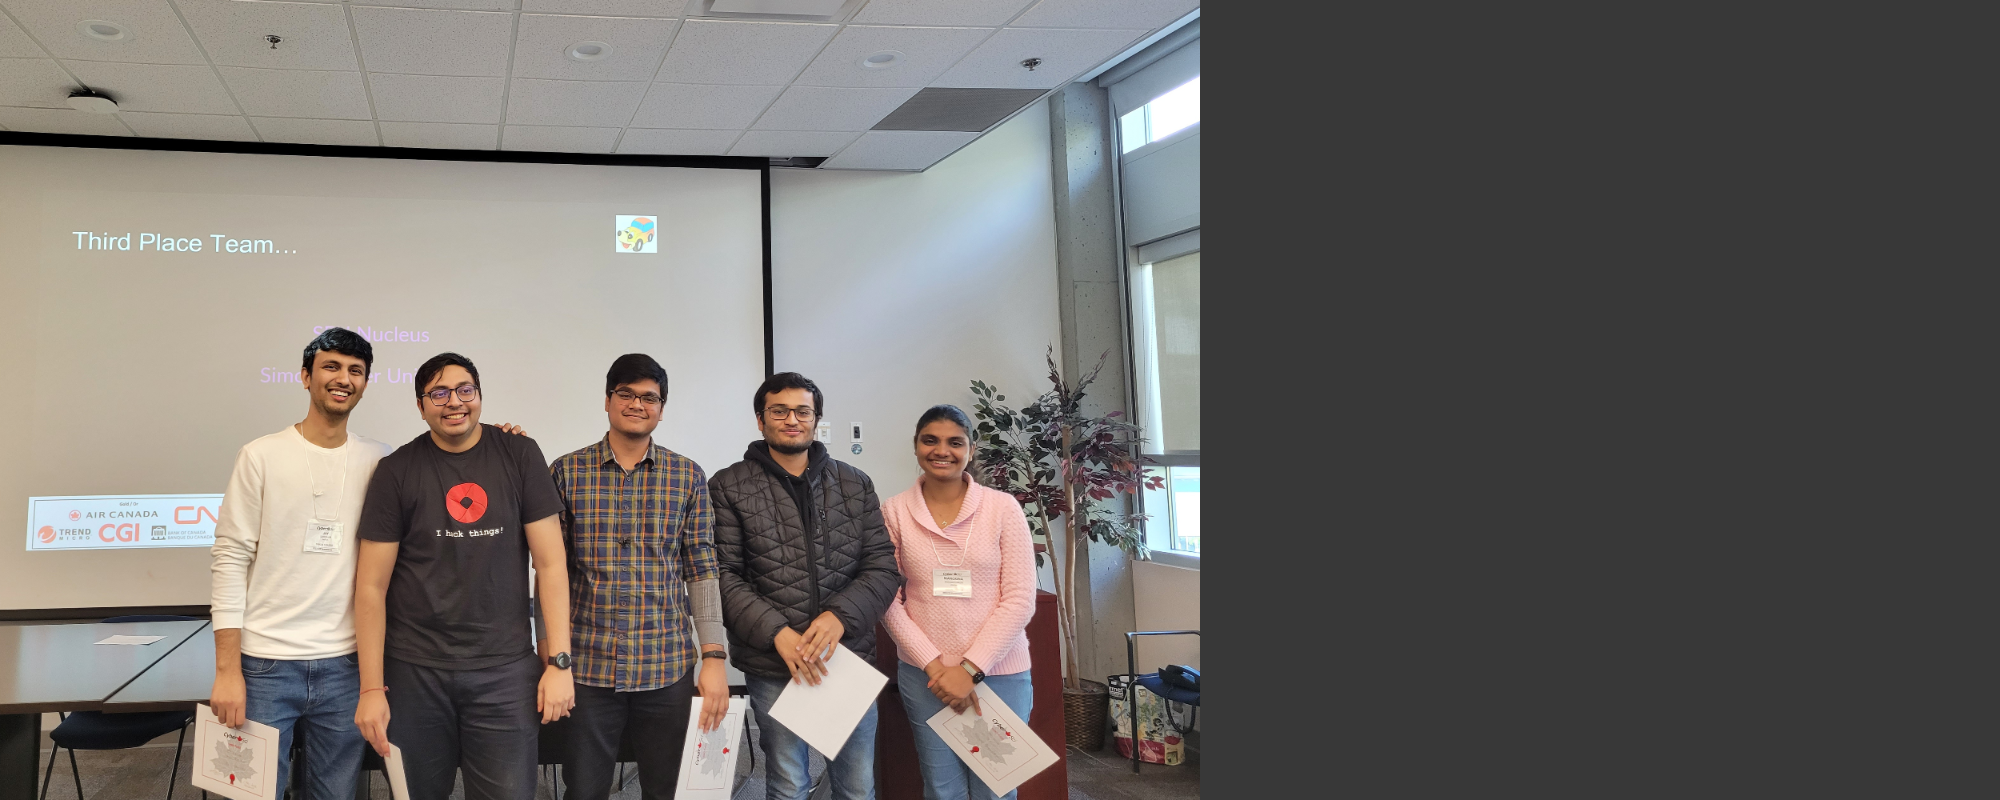 Team SFUNucleus takes third position at Canada’s Cyber Security Challenge Regional Event.